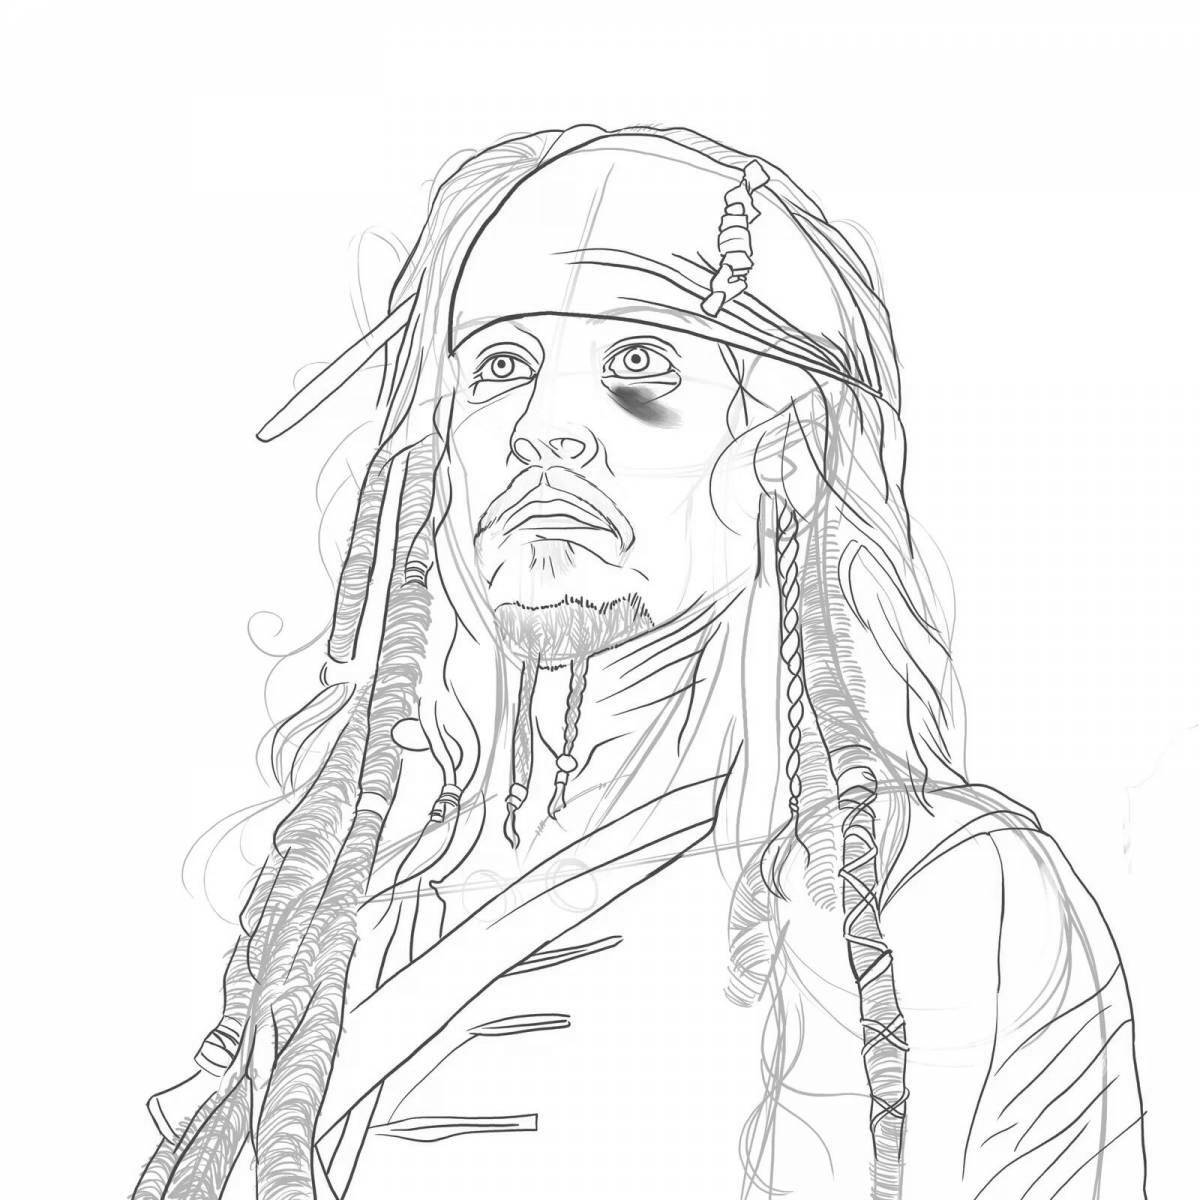 Grand Jack Sparrow coloring page